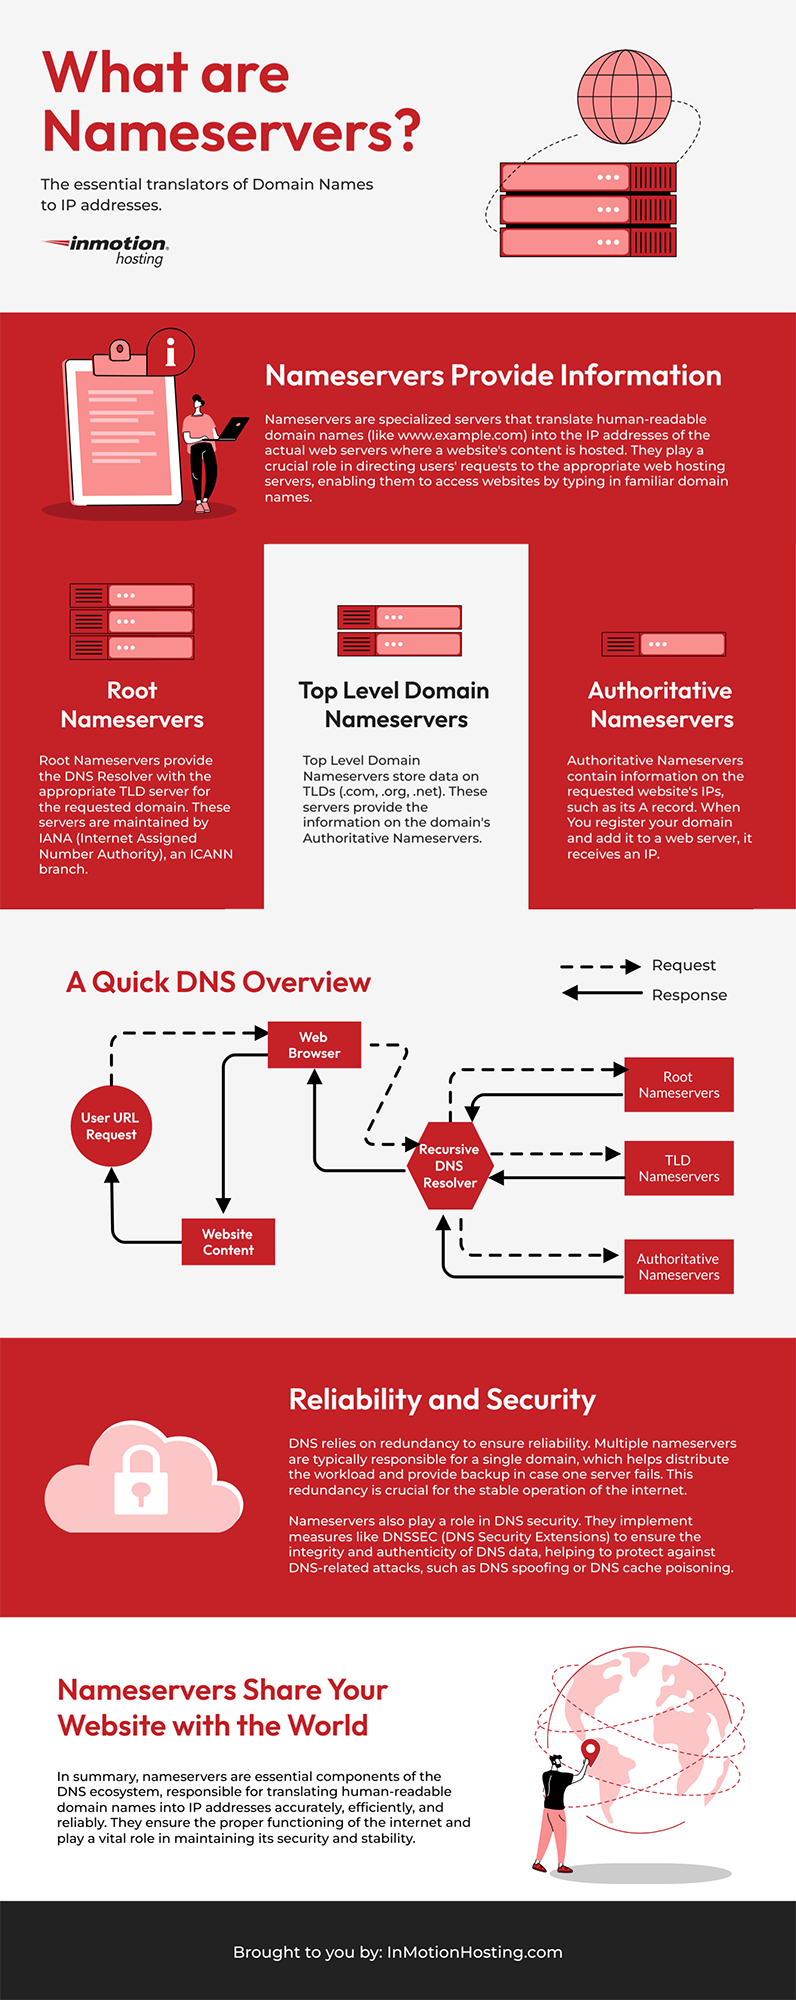 What are Nameservers? InMotion Hosting Infographic explaining the different types of Nameservers and their purpose.